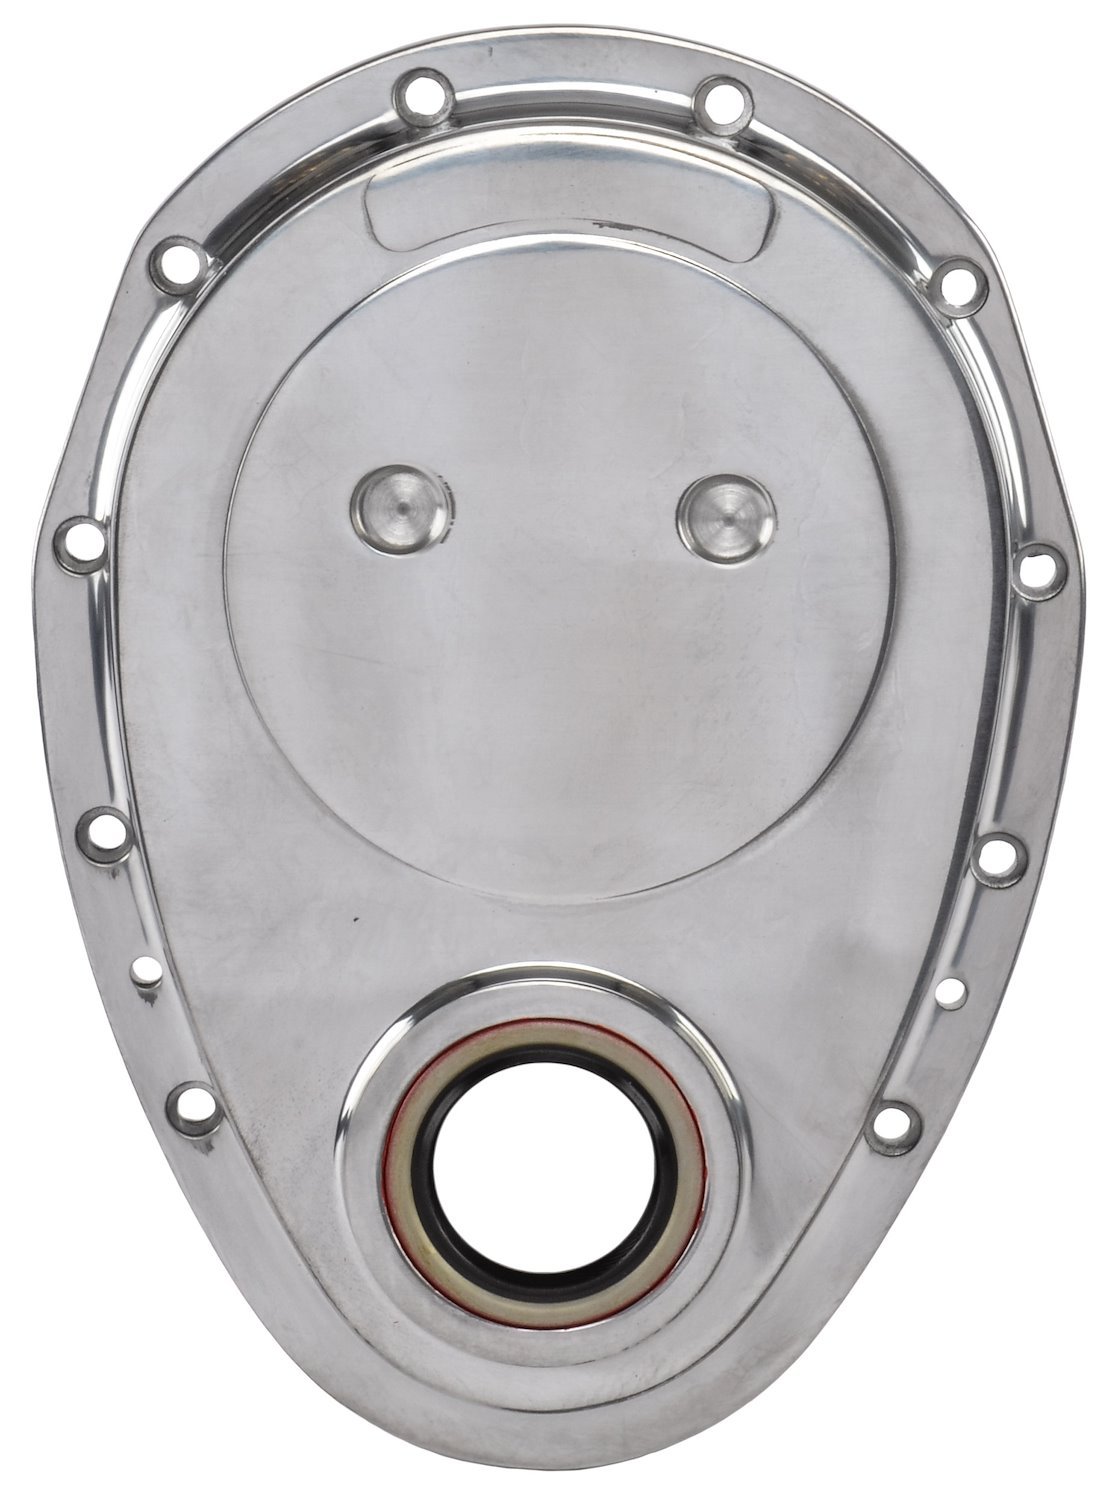 Timing Cover for 1956-1986 Small Block Chevy and 90-Degree V6 [Polished Aluminum]